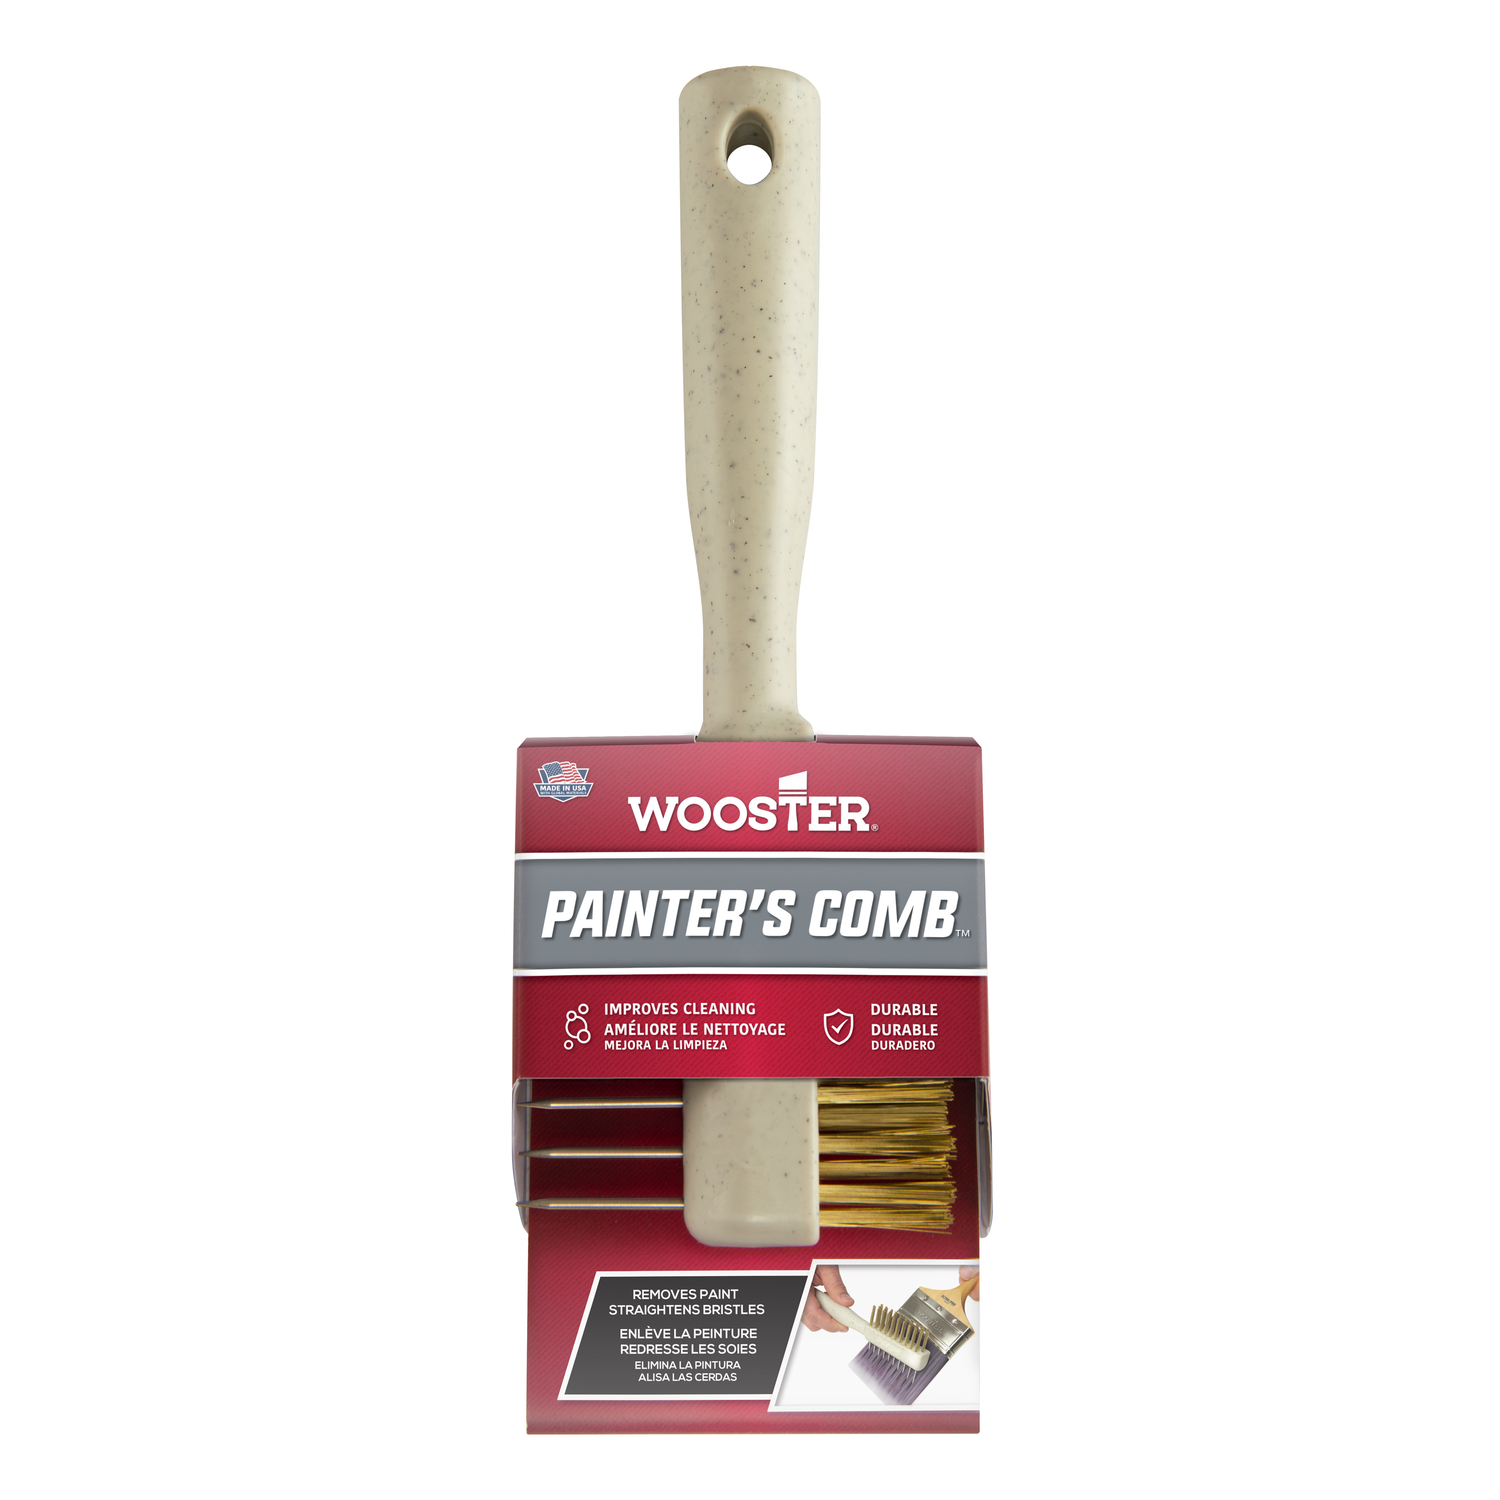 Photos - Putty Knife / Painting Tool Wooster Beige Stainless Steel Brush and Roller Cleaning Tool 1832